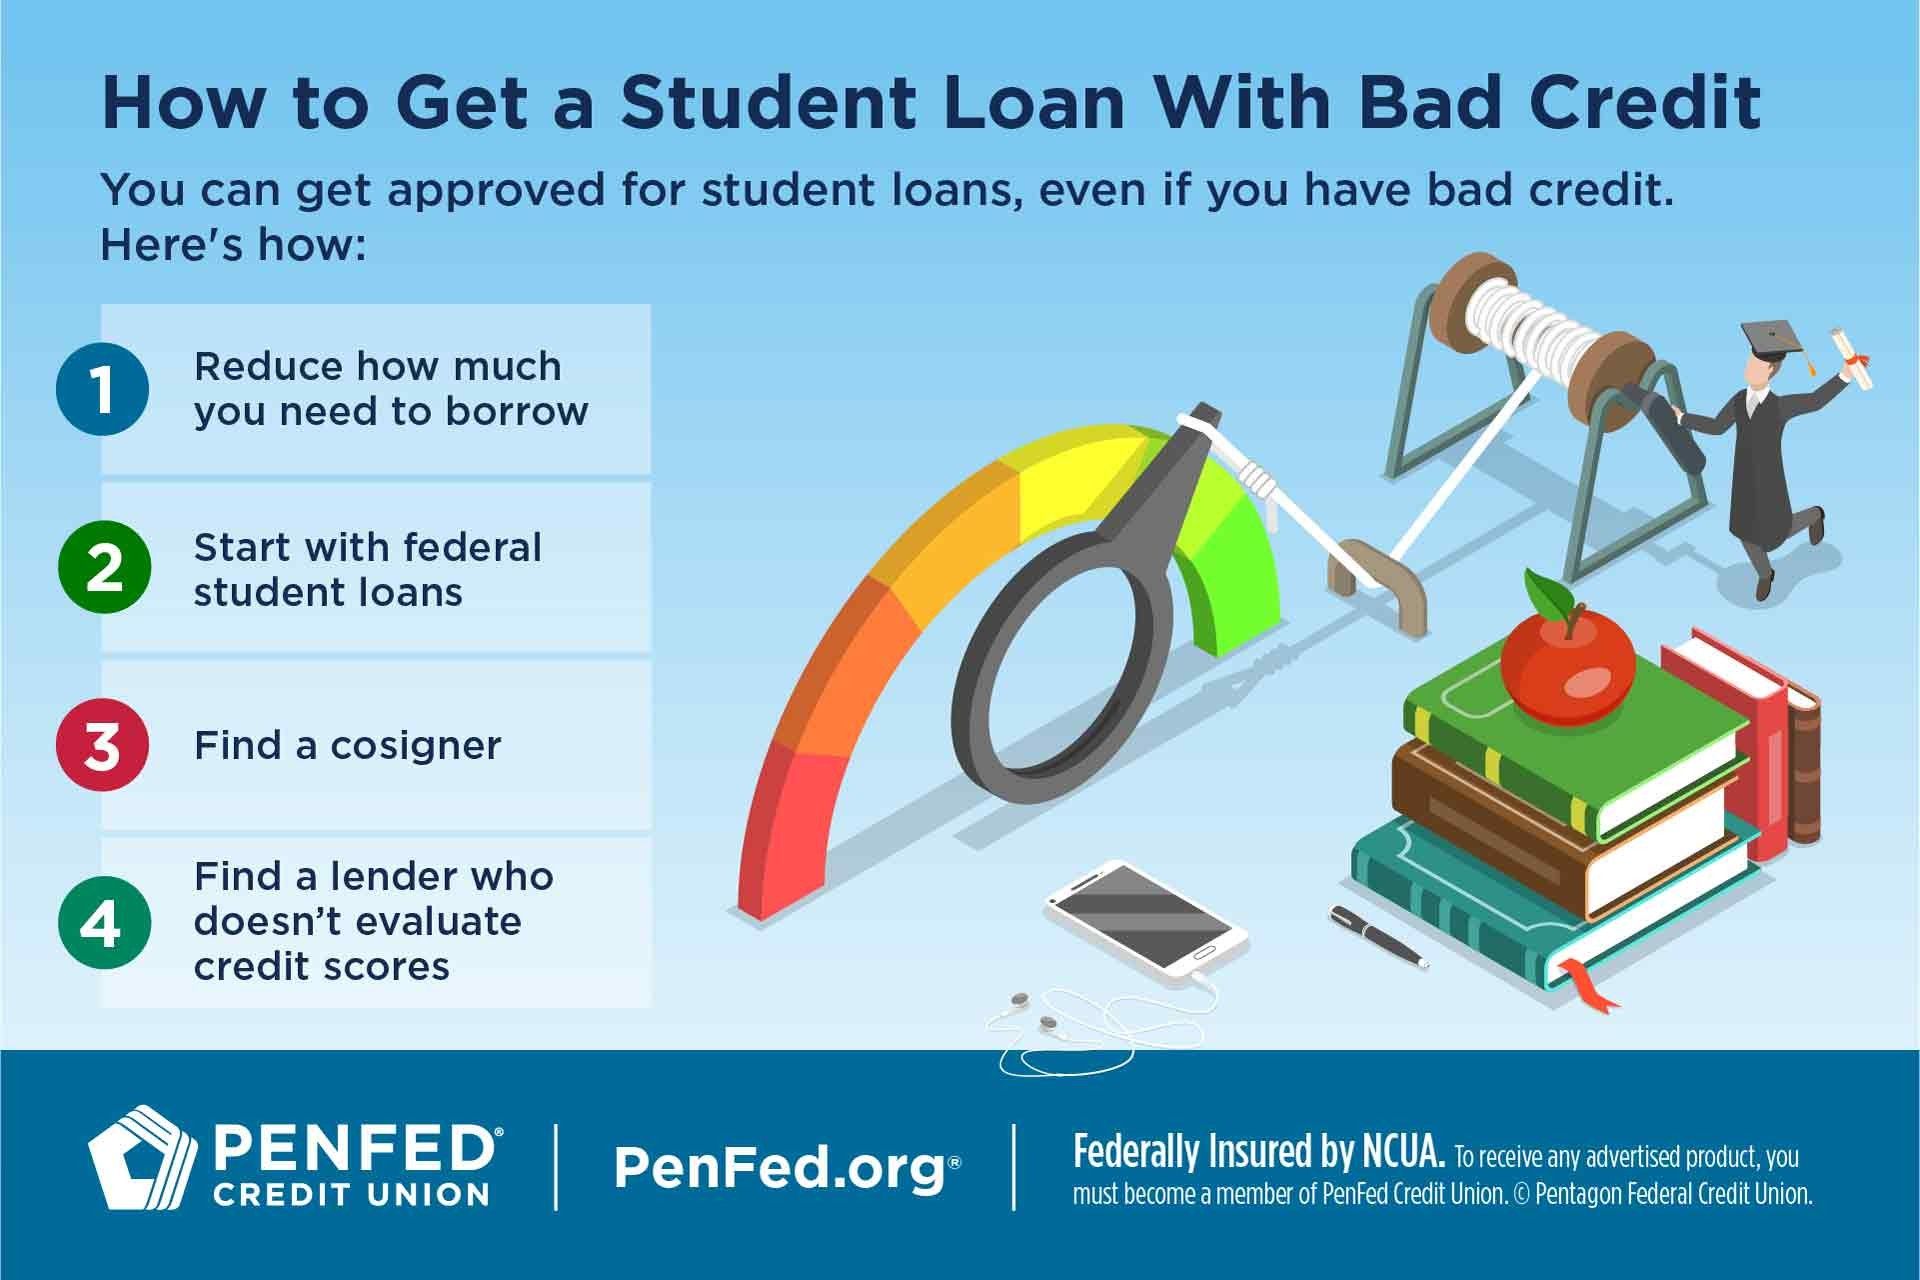 How to get a student loan with bad credit